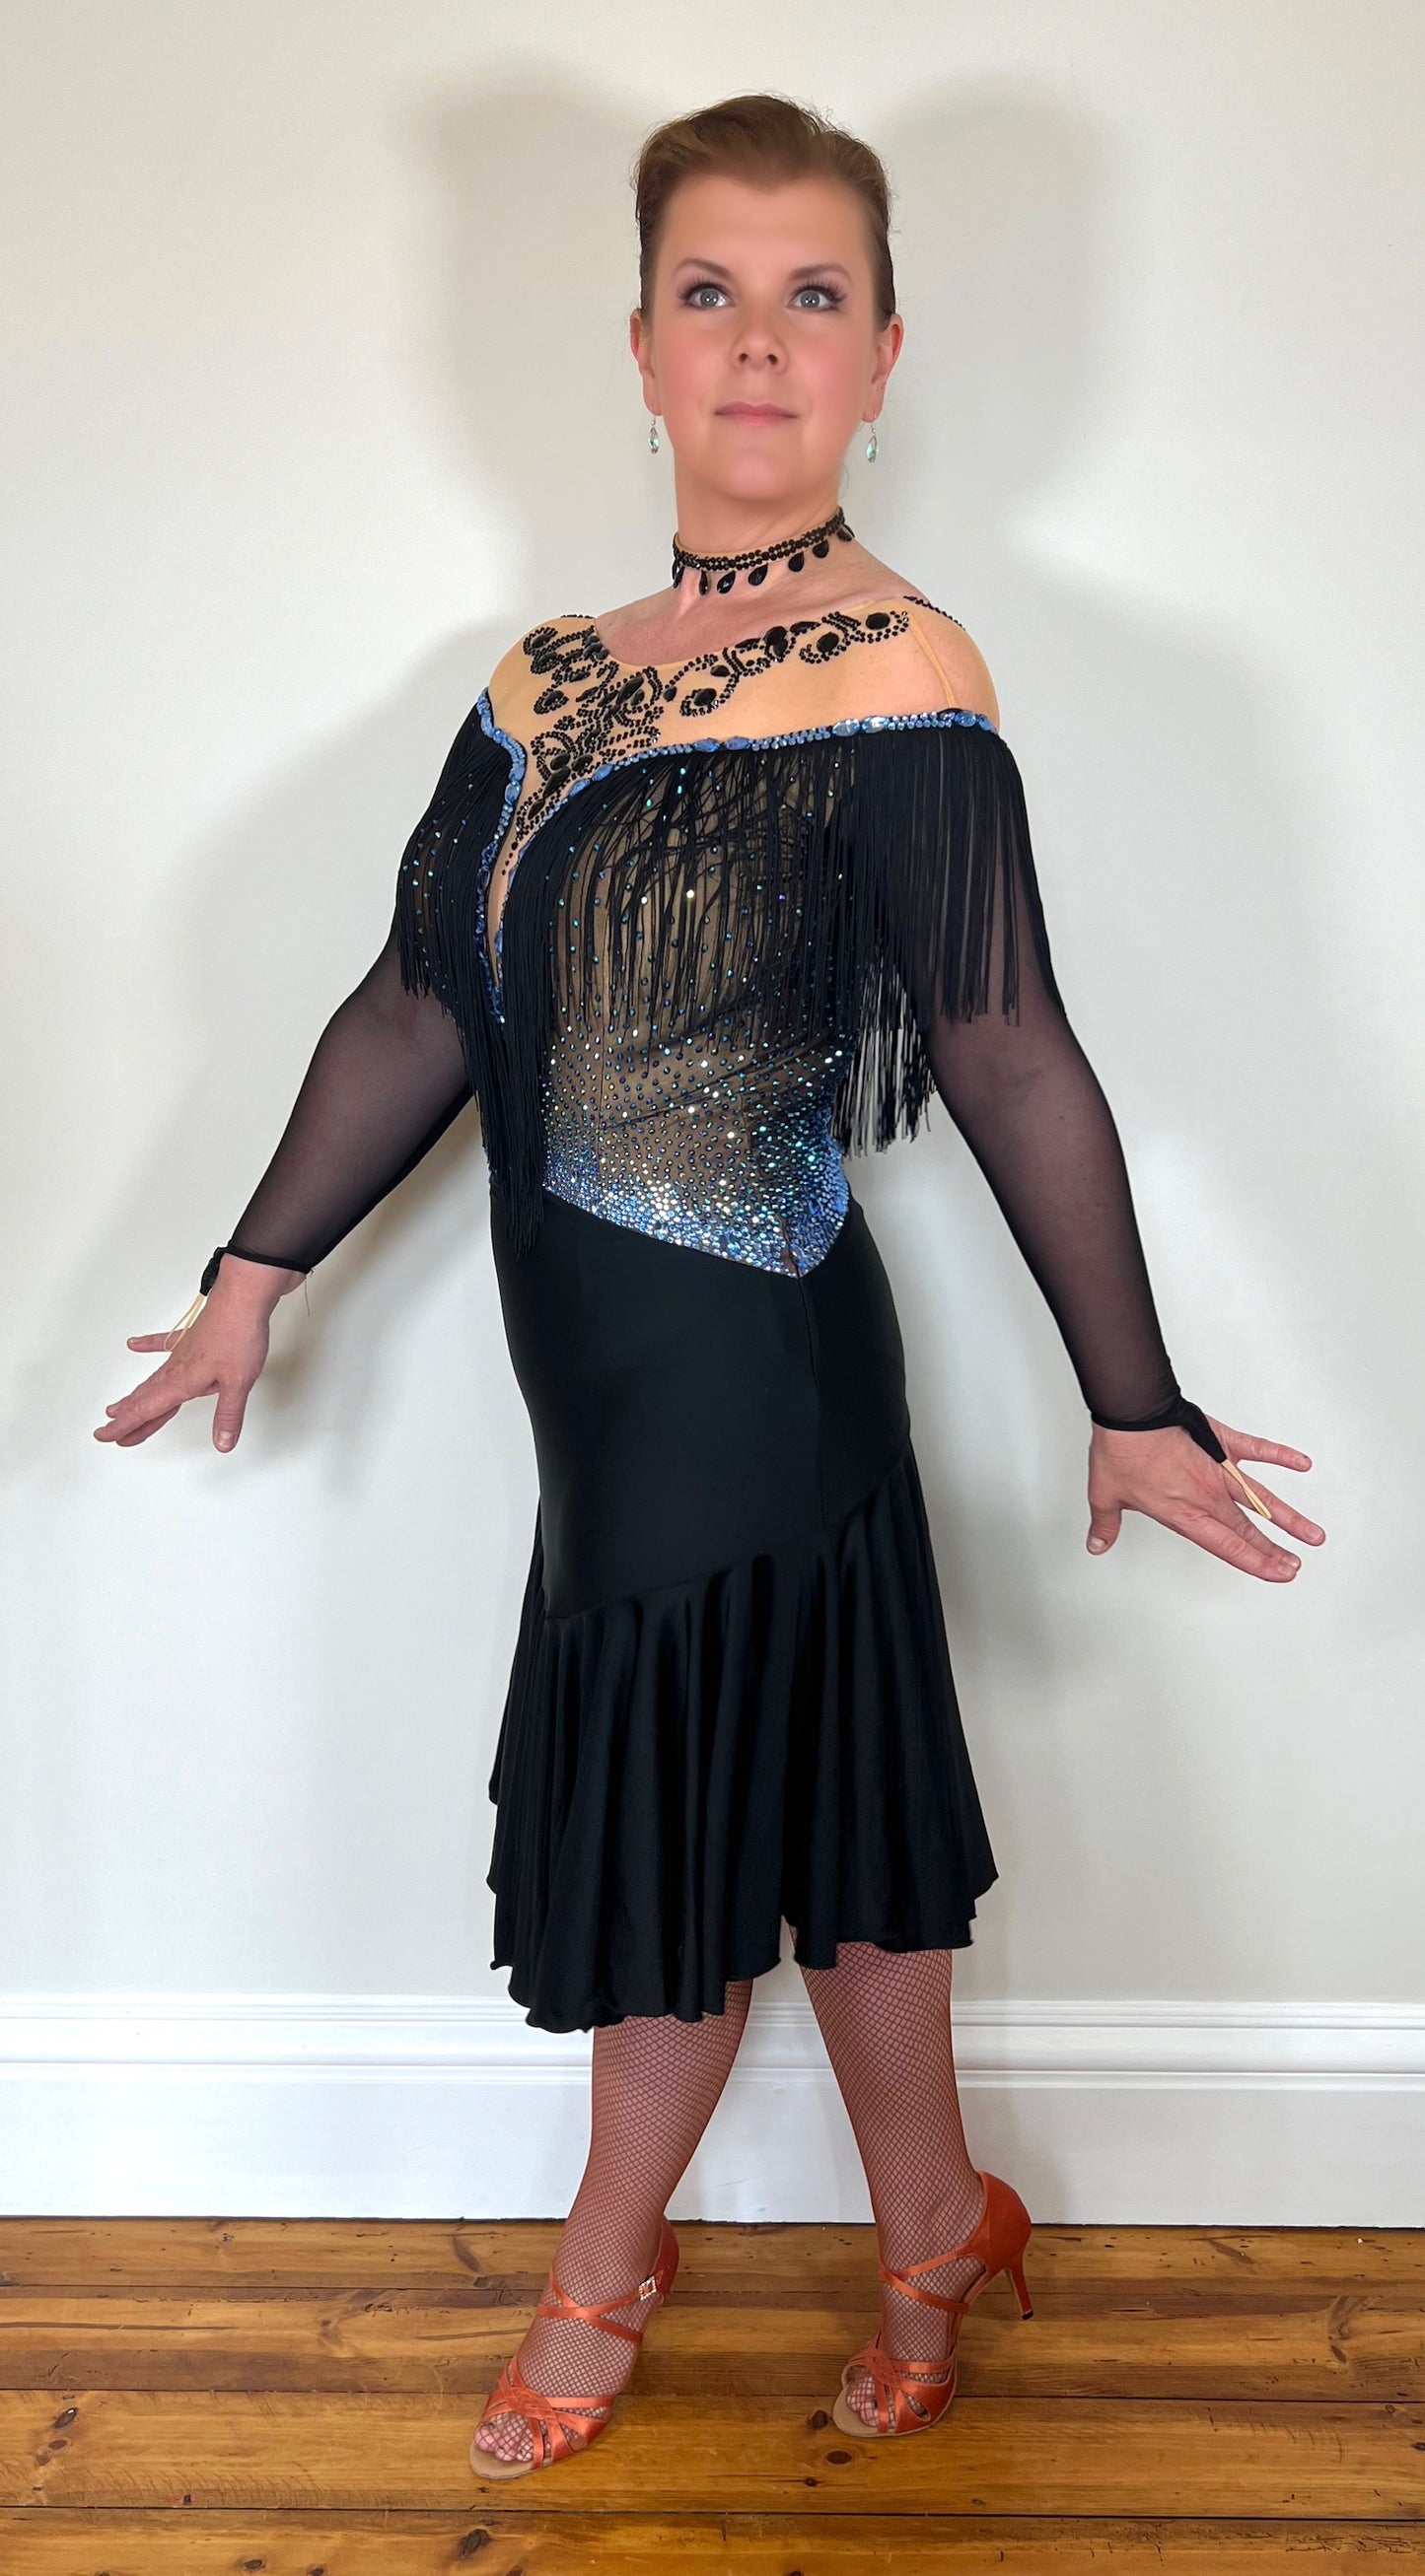 0012 Black Competition Latin Dress. Stoned in Sapphire AB & Jet stones. Off the shoulder effect mesh. Black fringe detail to front & back. Full frill skirt giving lovely movement.